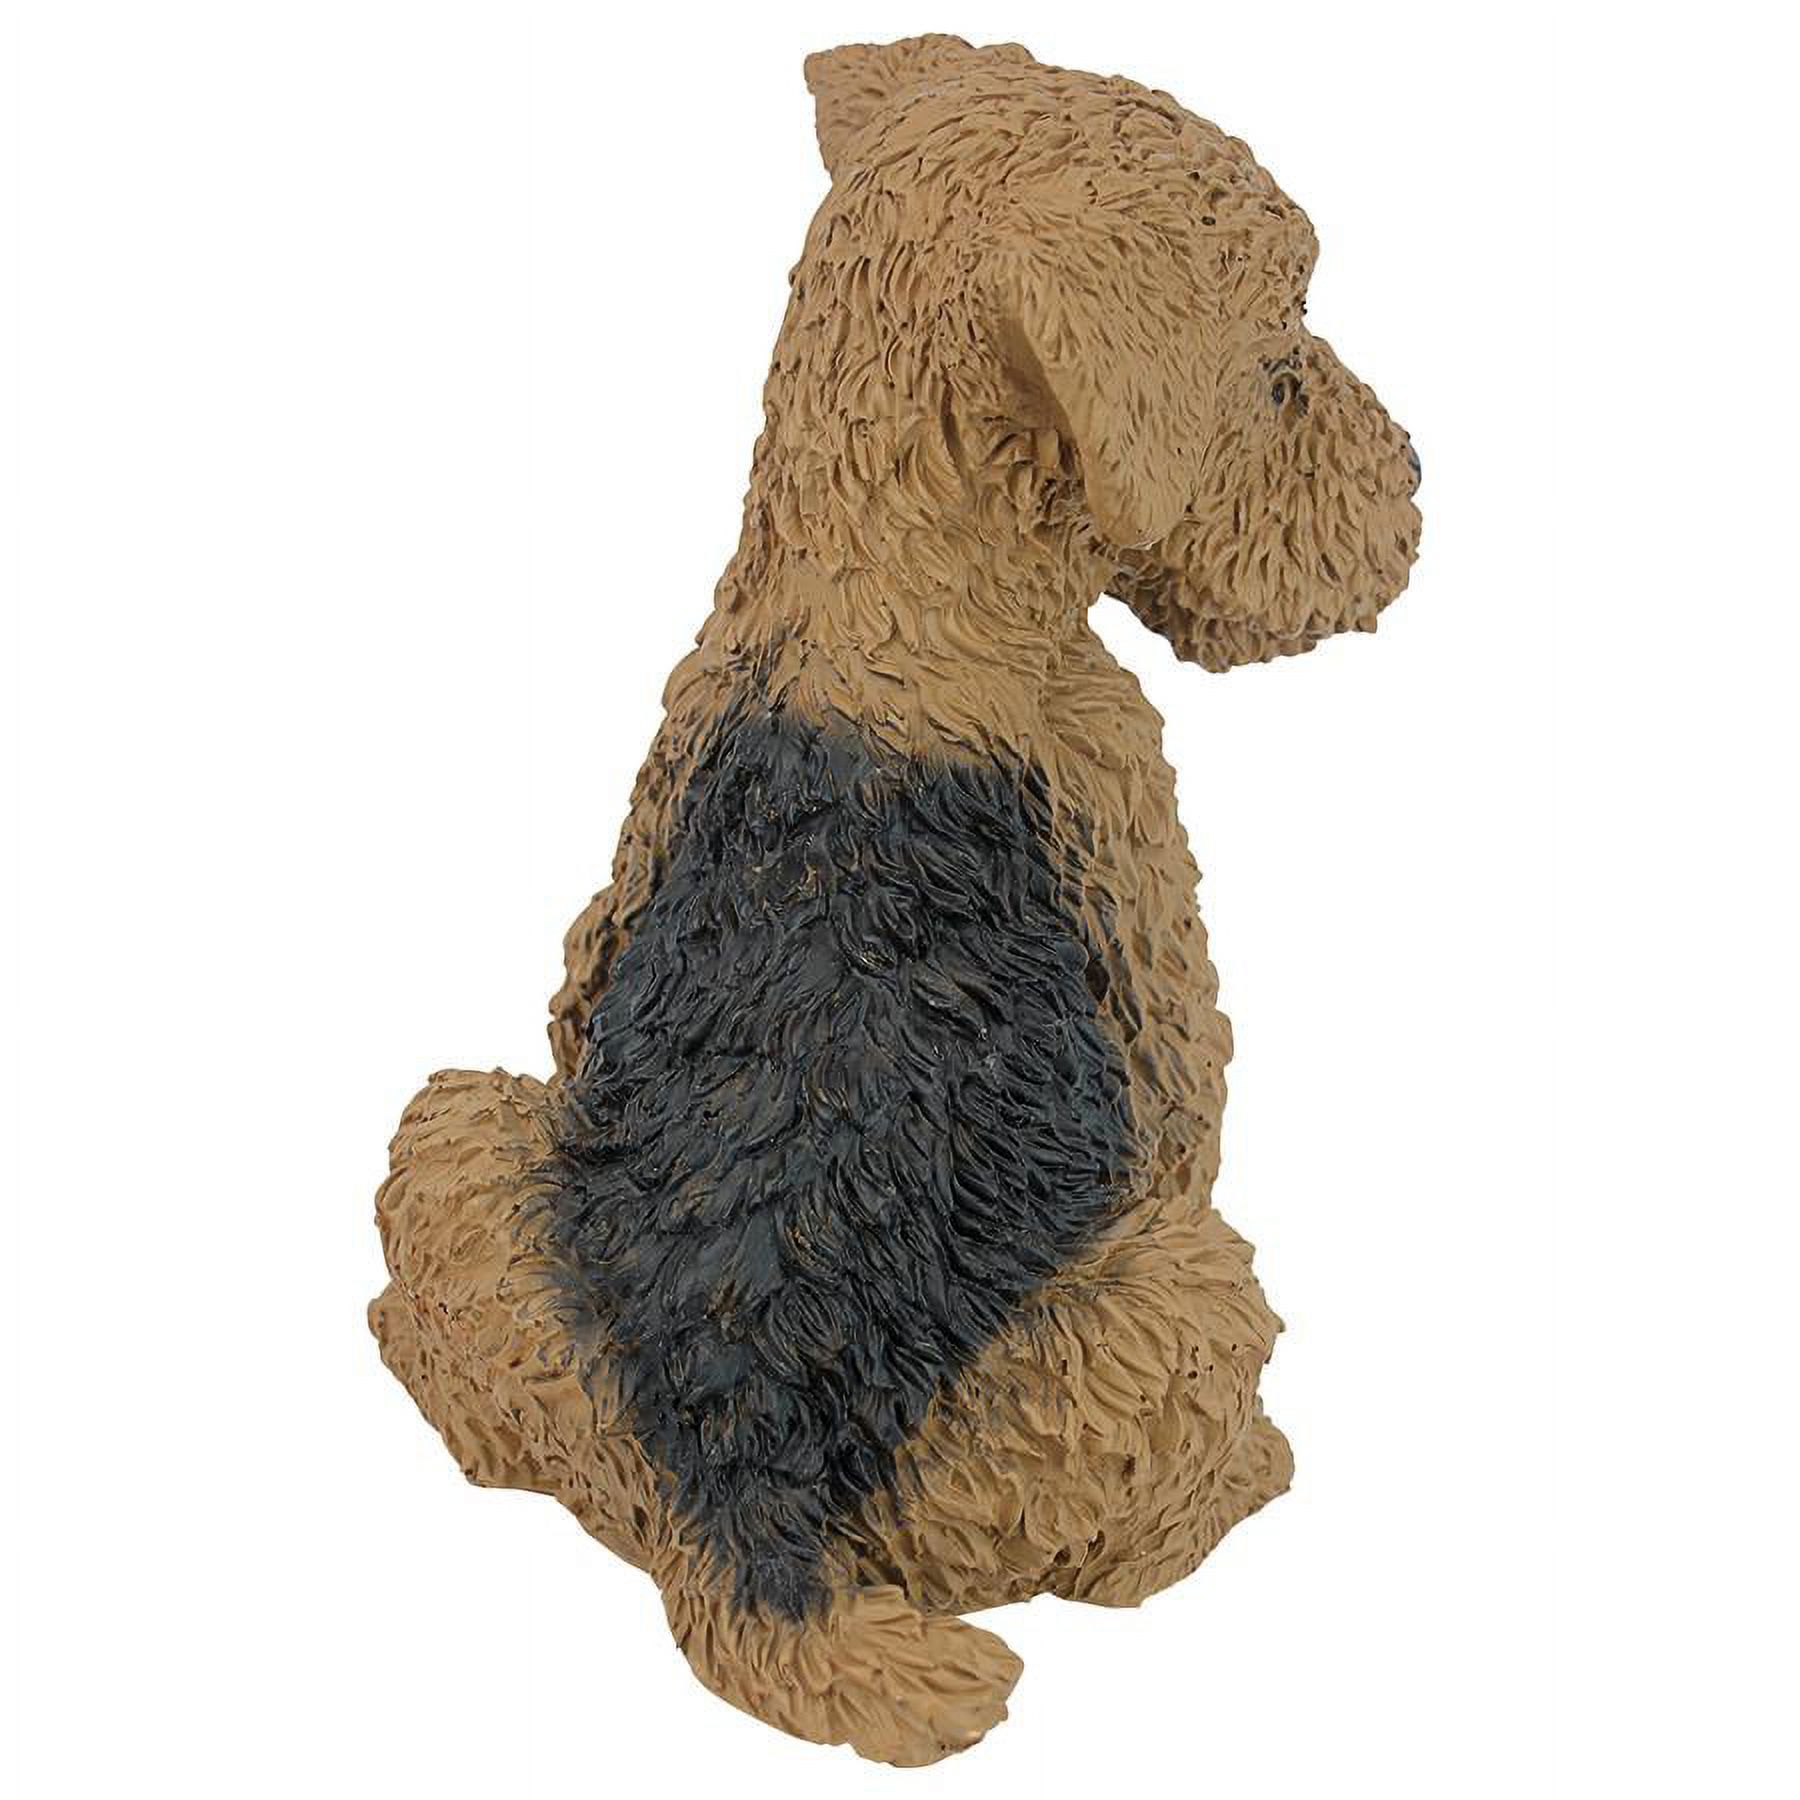 Design Toscano Airedale Puppy Dog Statue - image 5 of 7